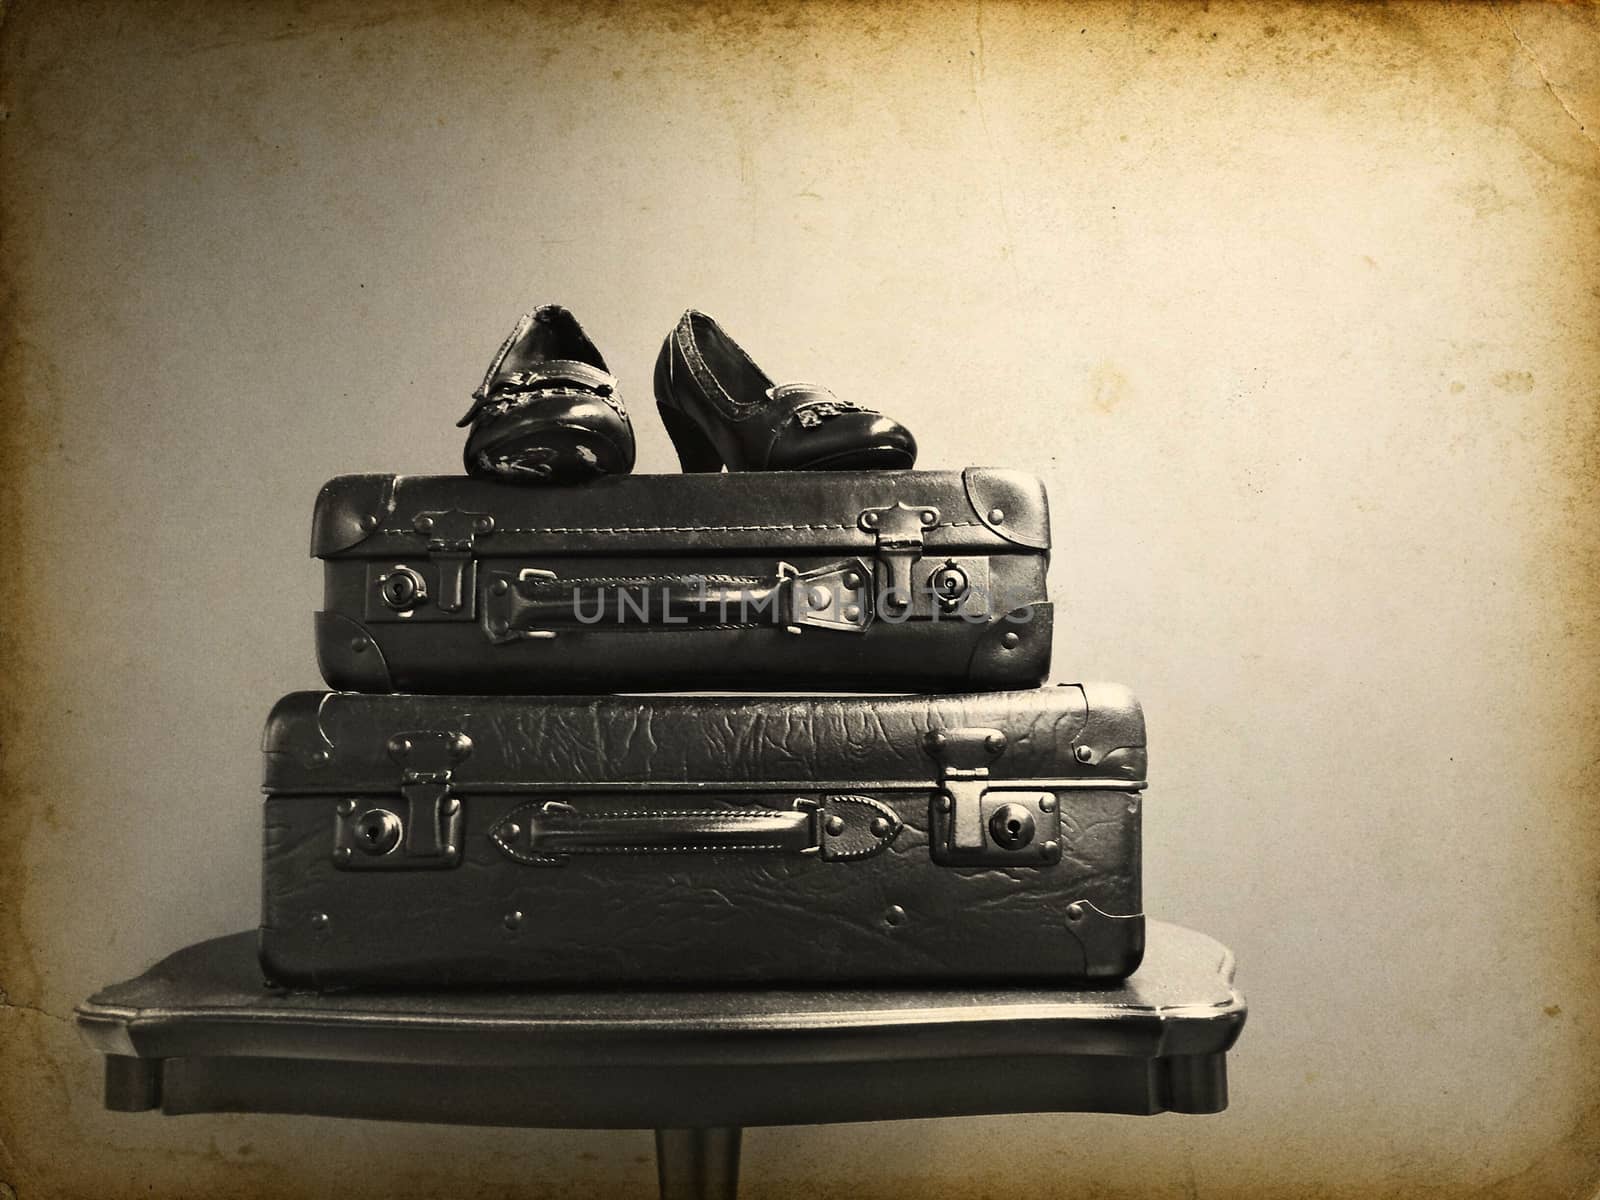 Vintage suitcases and shoes on a table by anikasalsera